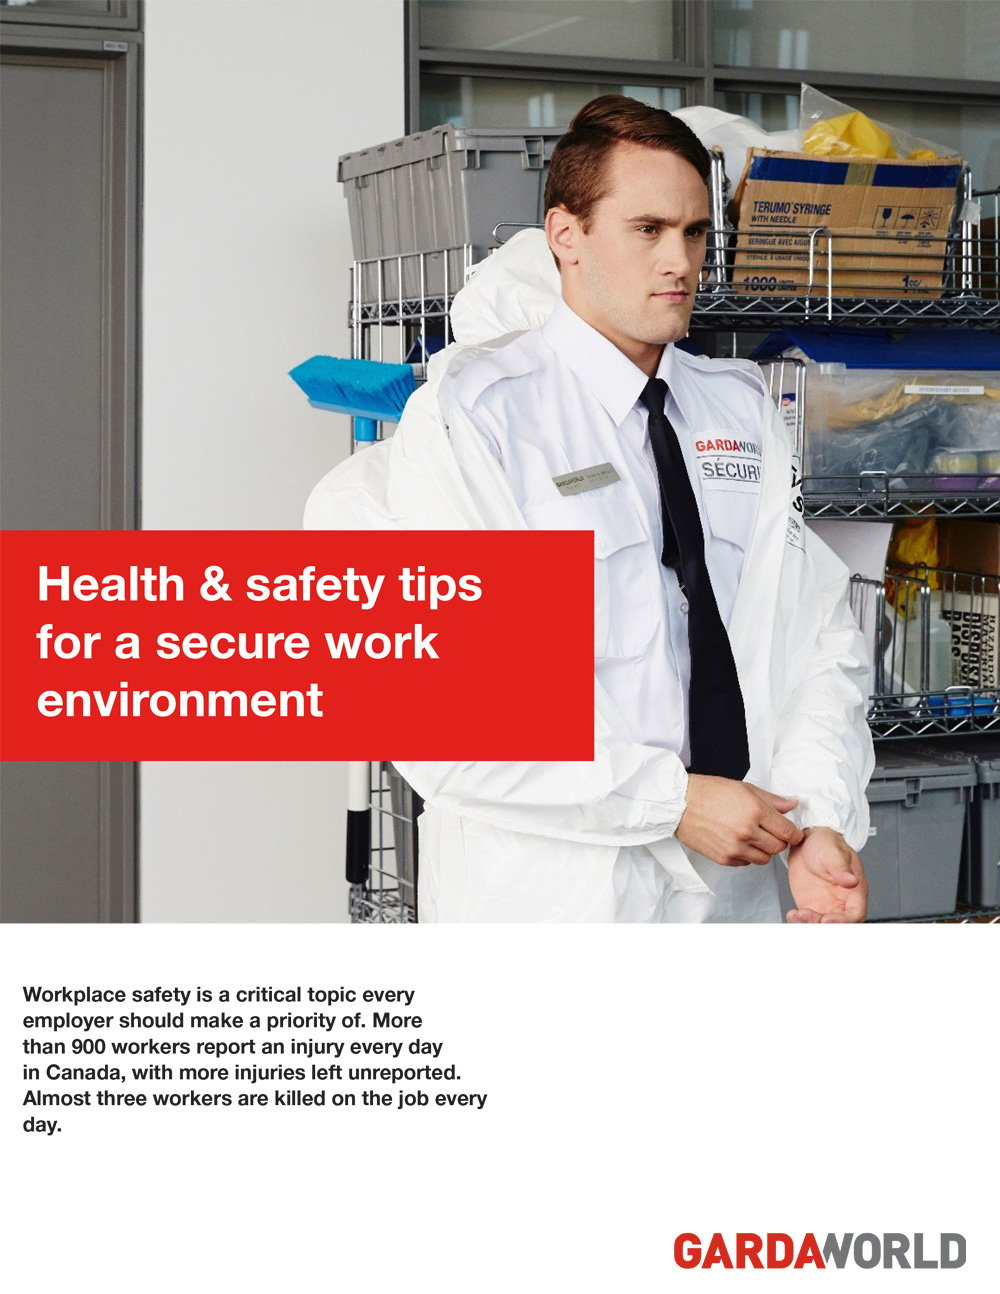 Health and safety tips for a secure work environment